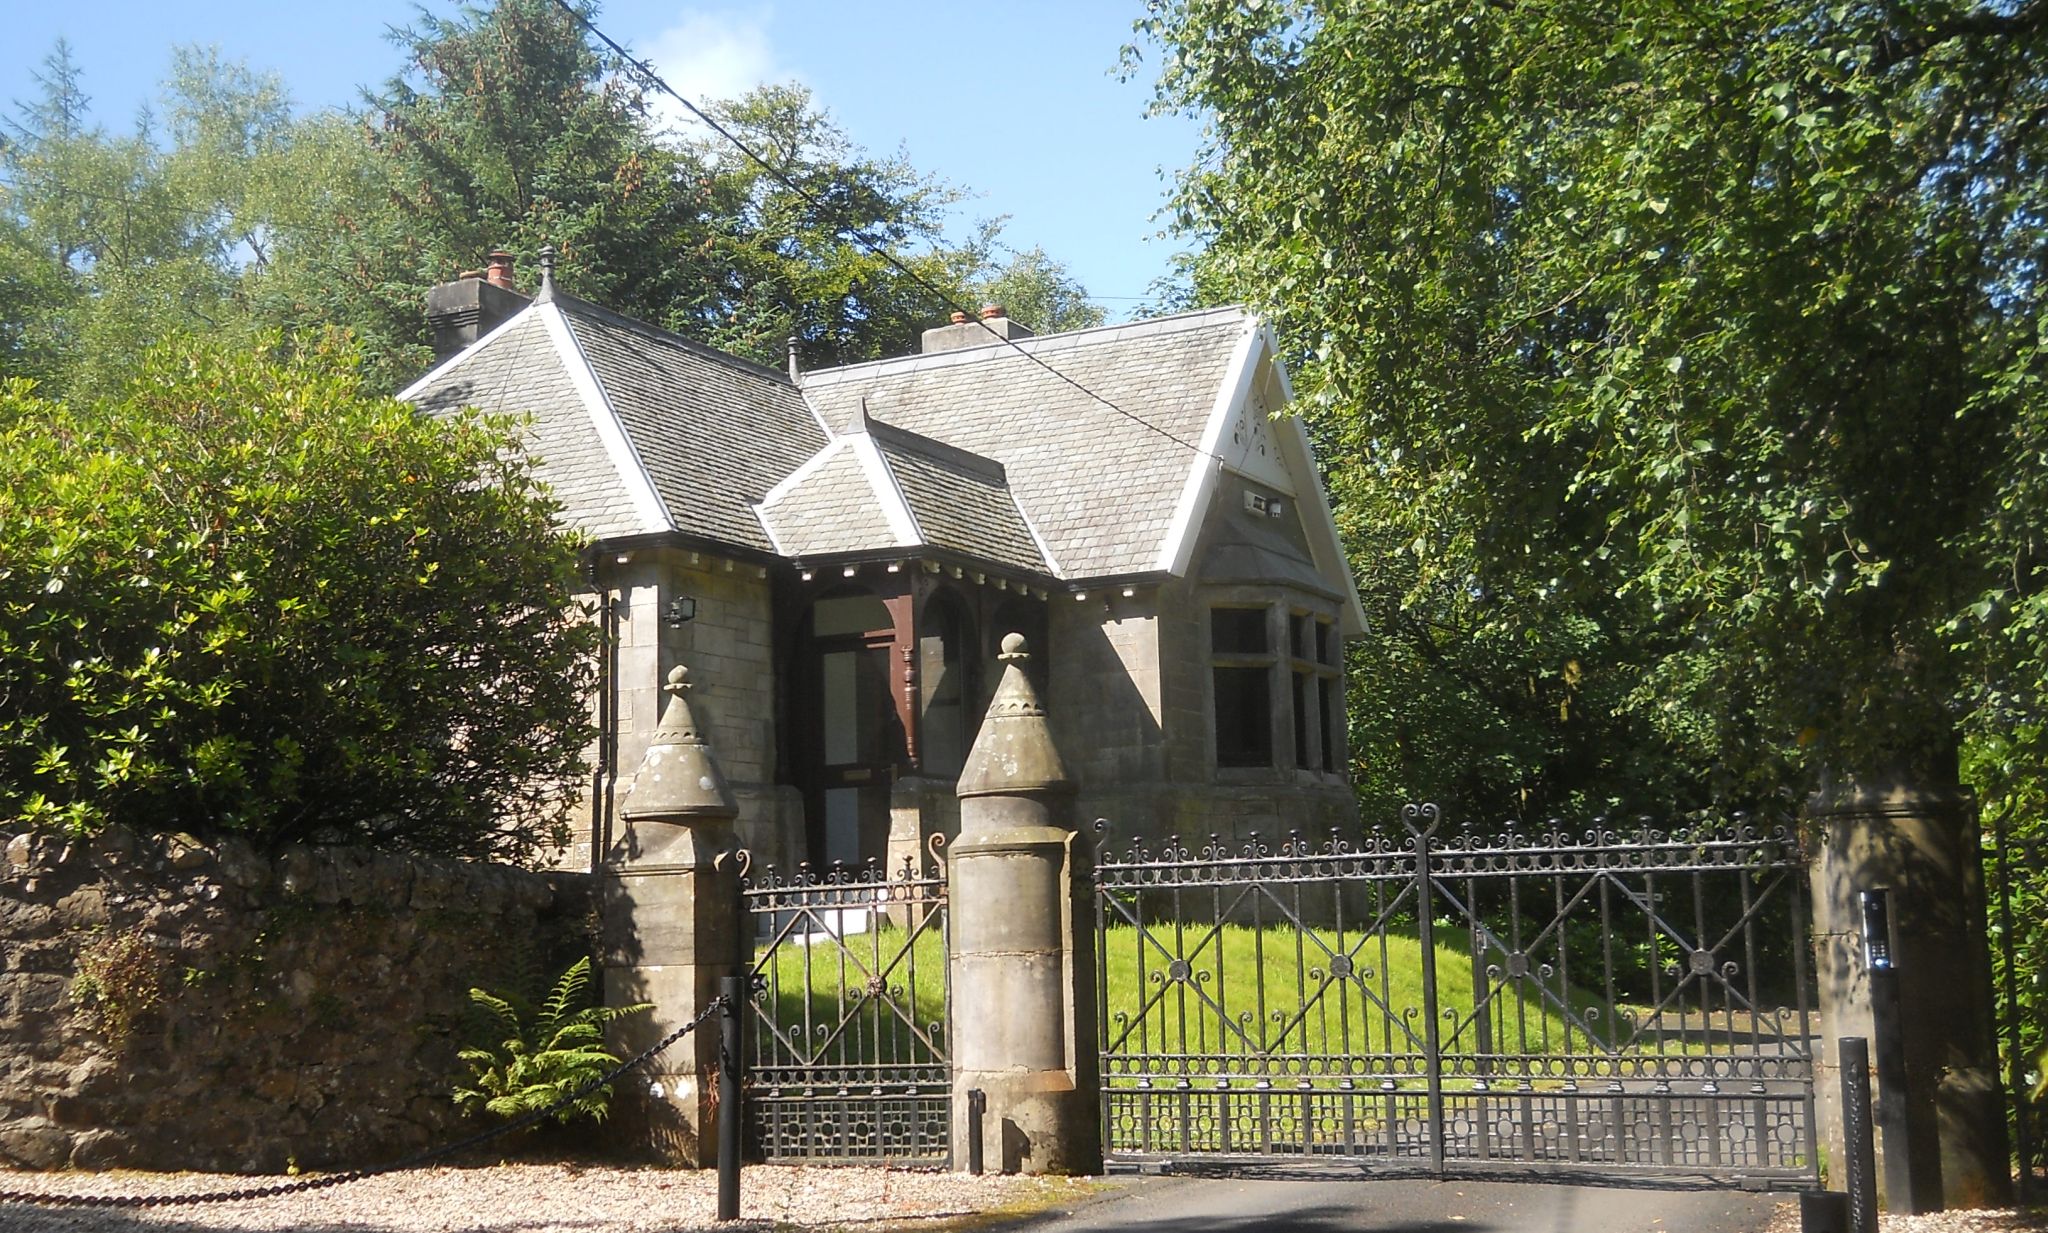 Entrance gate and Lodge for Craigallian House